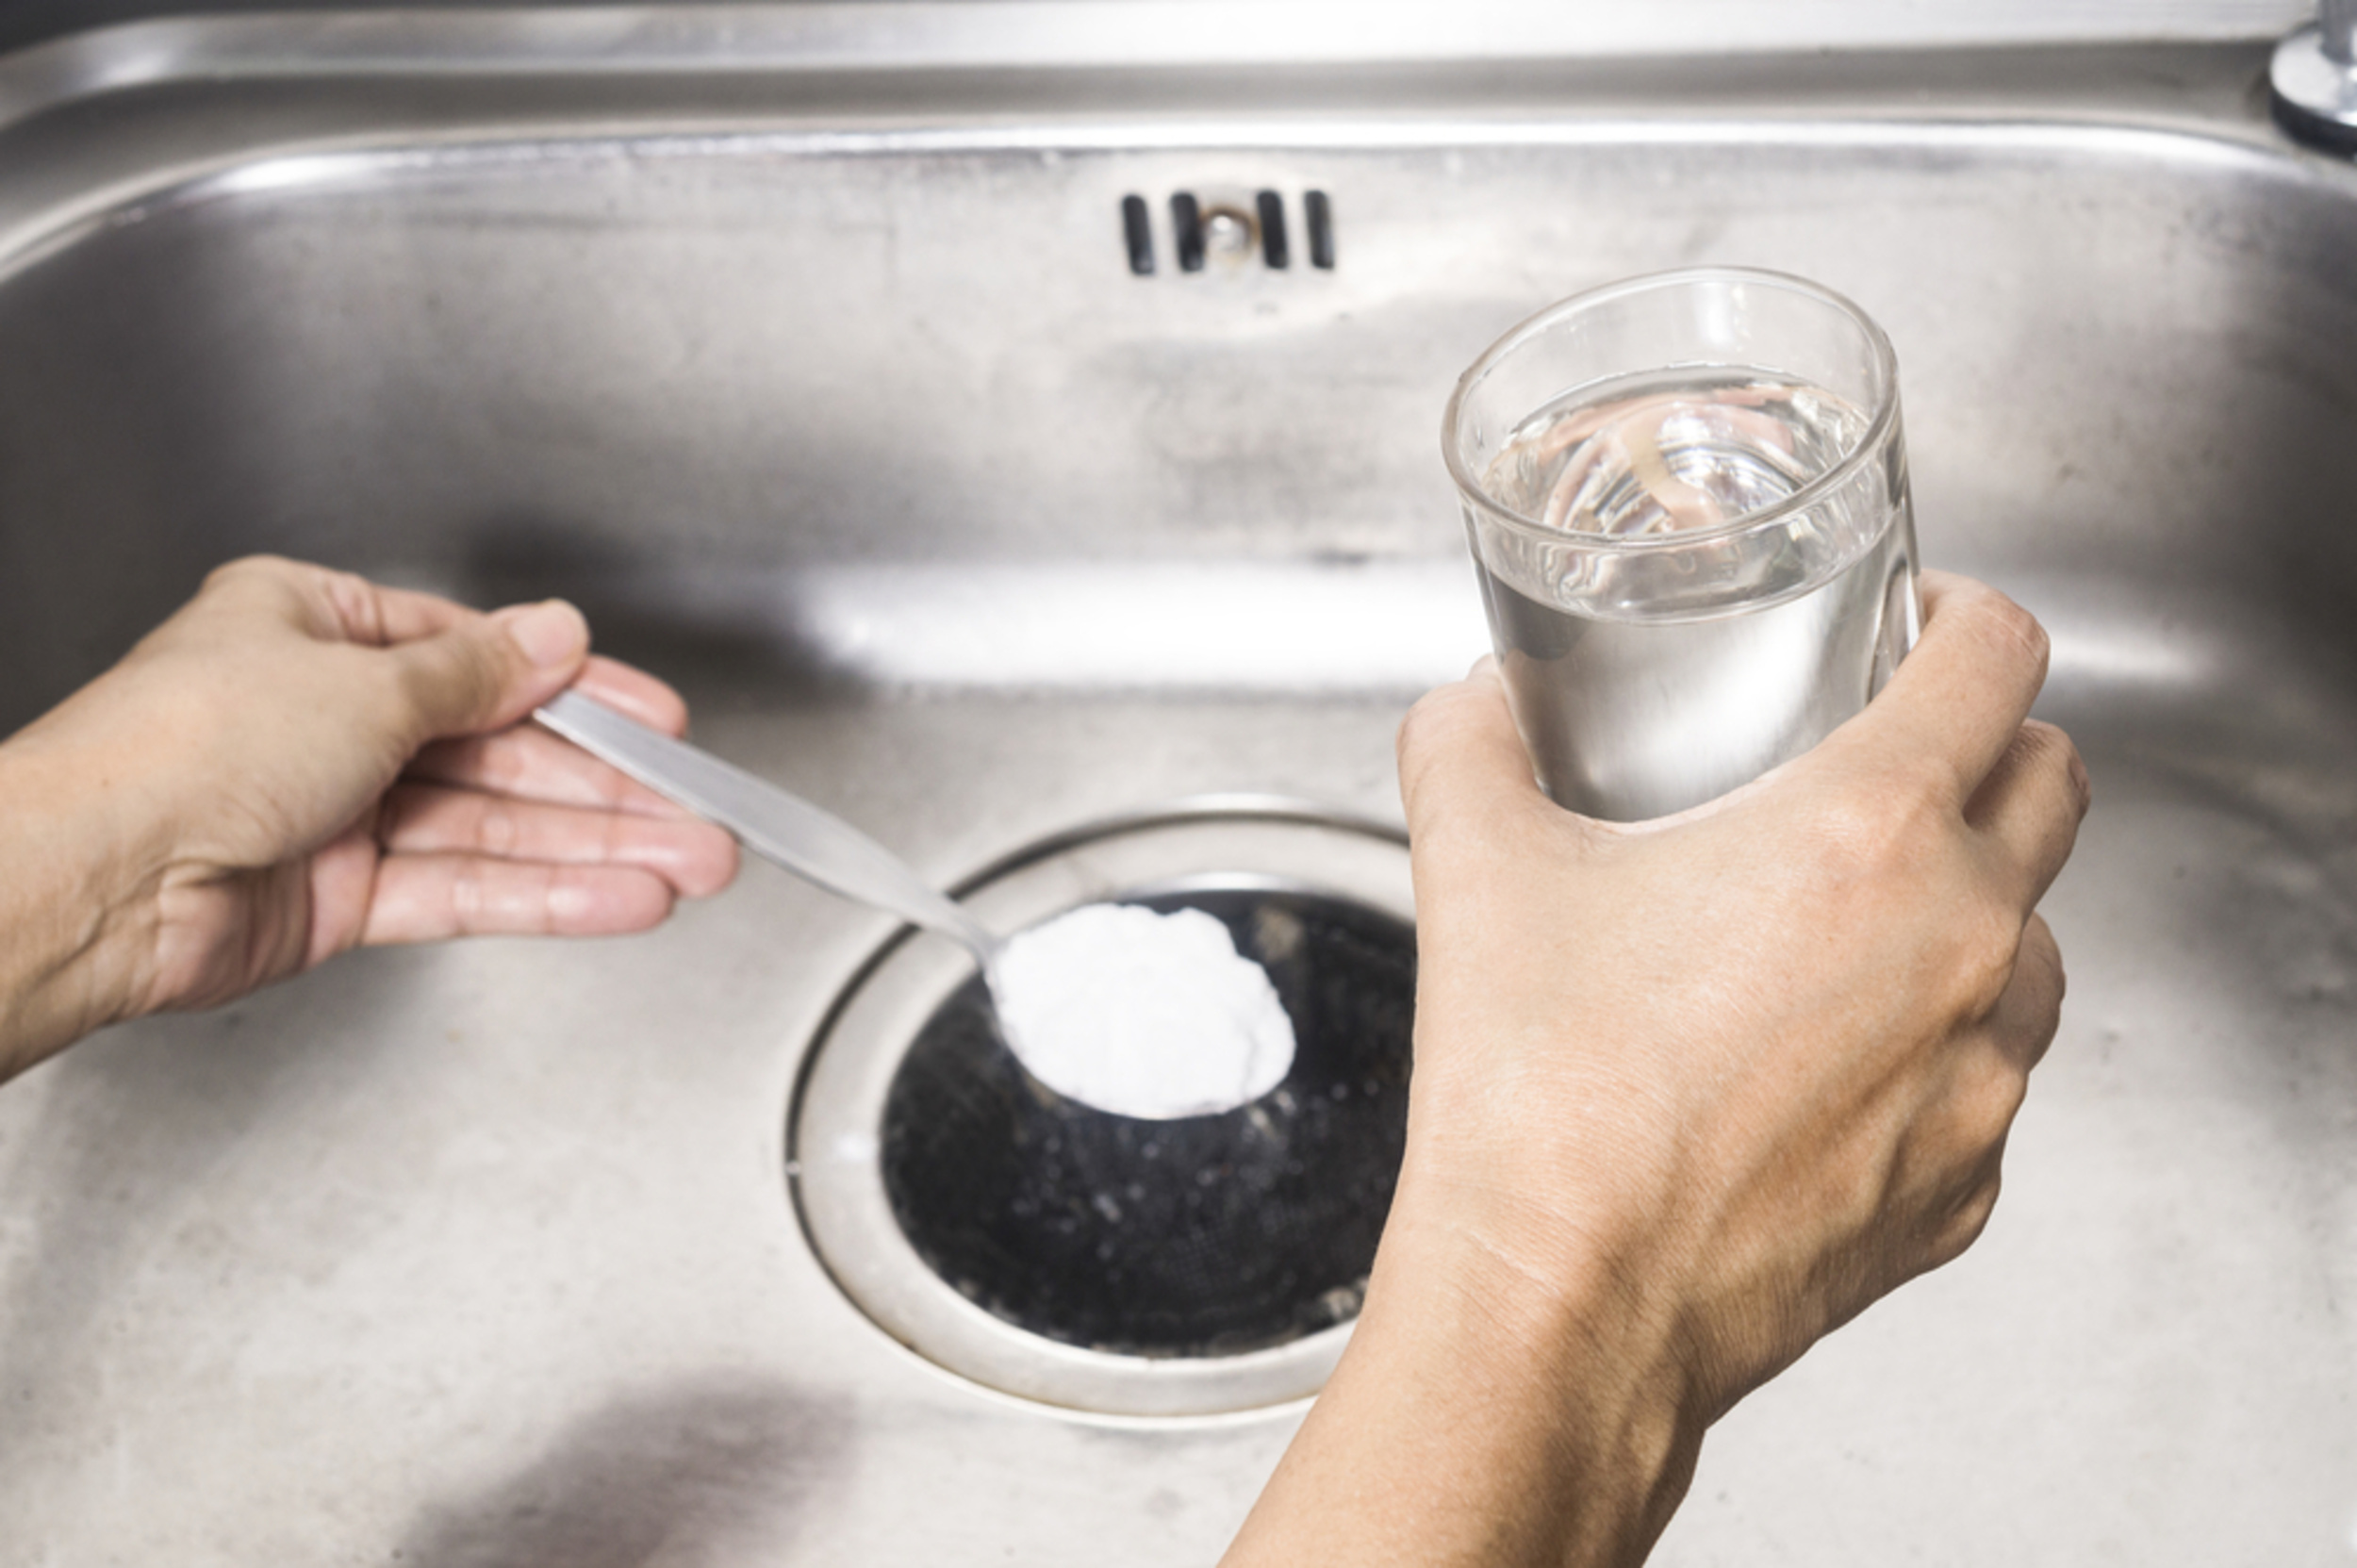 <p>From disinfecting surfaces to cleaning out your garbage disposal, baking soda and vinegar are seriously versatile. Combine them to unclog drains, or use baking soda on its own to scrub away stains and freshen musty odors, and employ vinegar as a cheap fabric softener or all-purpose cleaner. </p><p>You may also like: <a href='https://www.yardbarker.com/lifestyle/articles/20_ingredients_that_will_make_your_grilled_cheese_even_better_112923/s1__26129069'>20 ingredients that will make your grilled cheese even better</a></p>